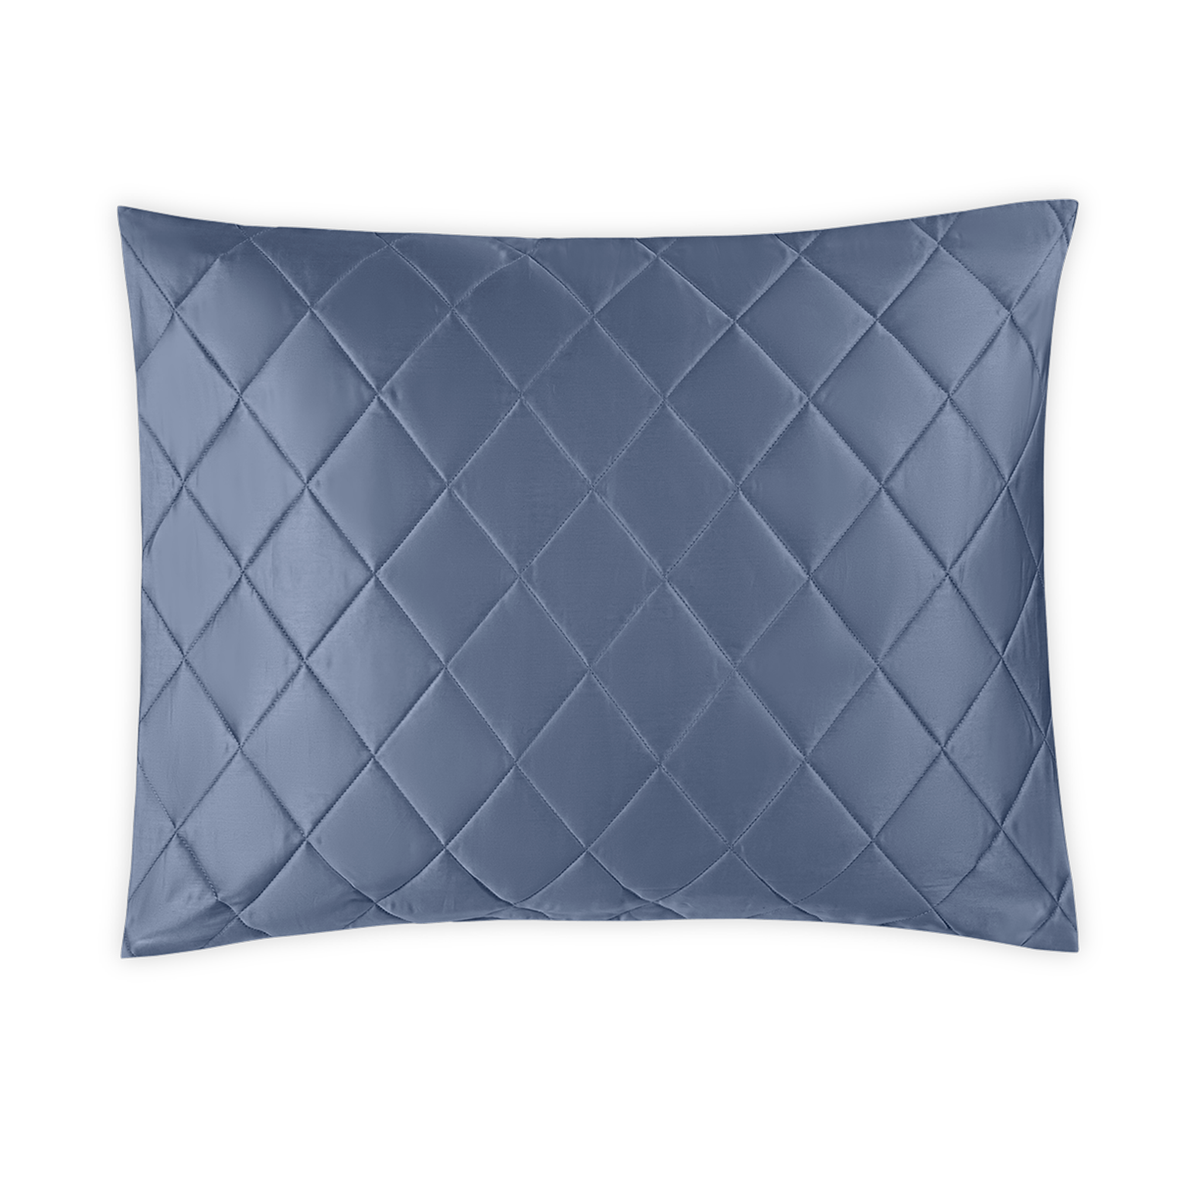 Silo Image of Matouk Nocturne Quilted Bedding Sham in Steel Blue